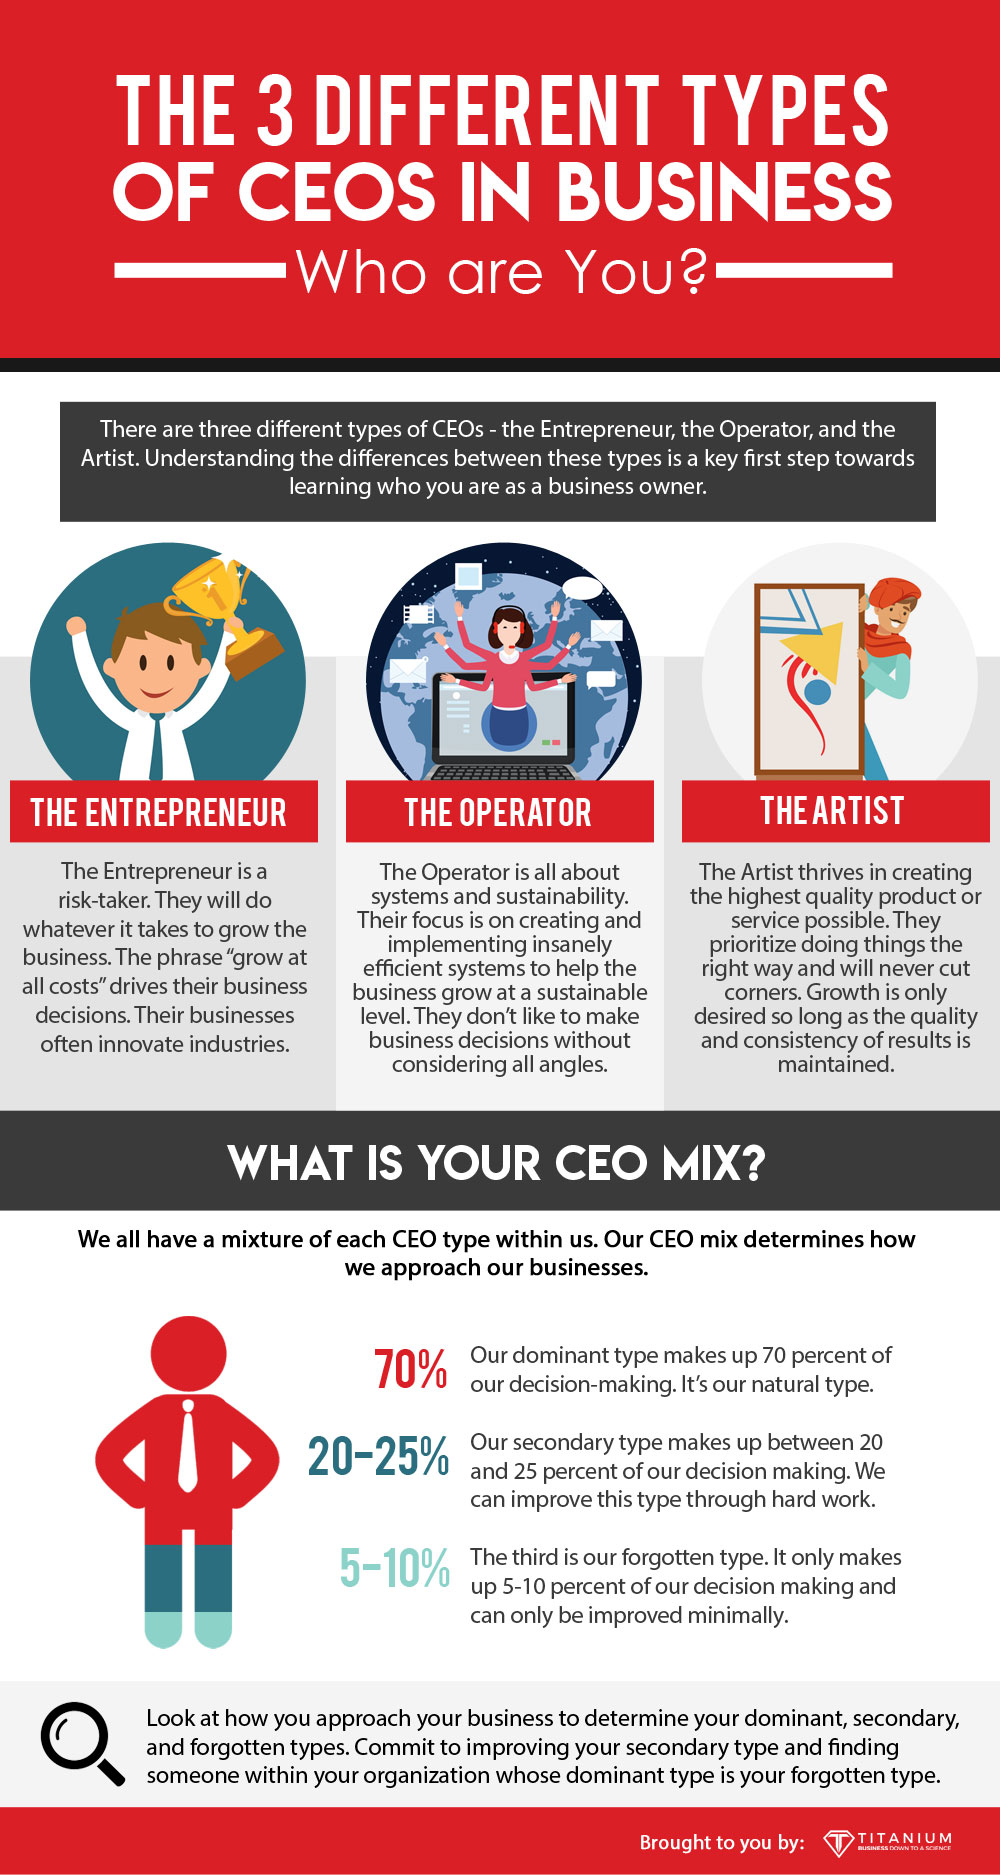 3 different types of CEOs in business